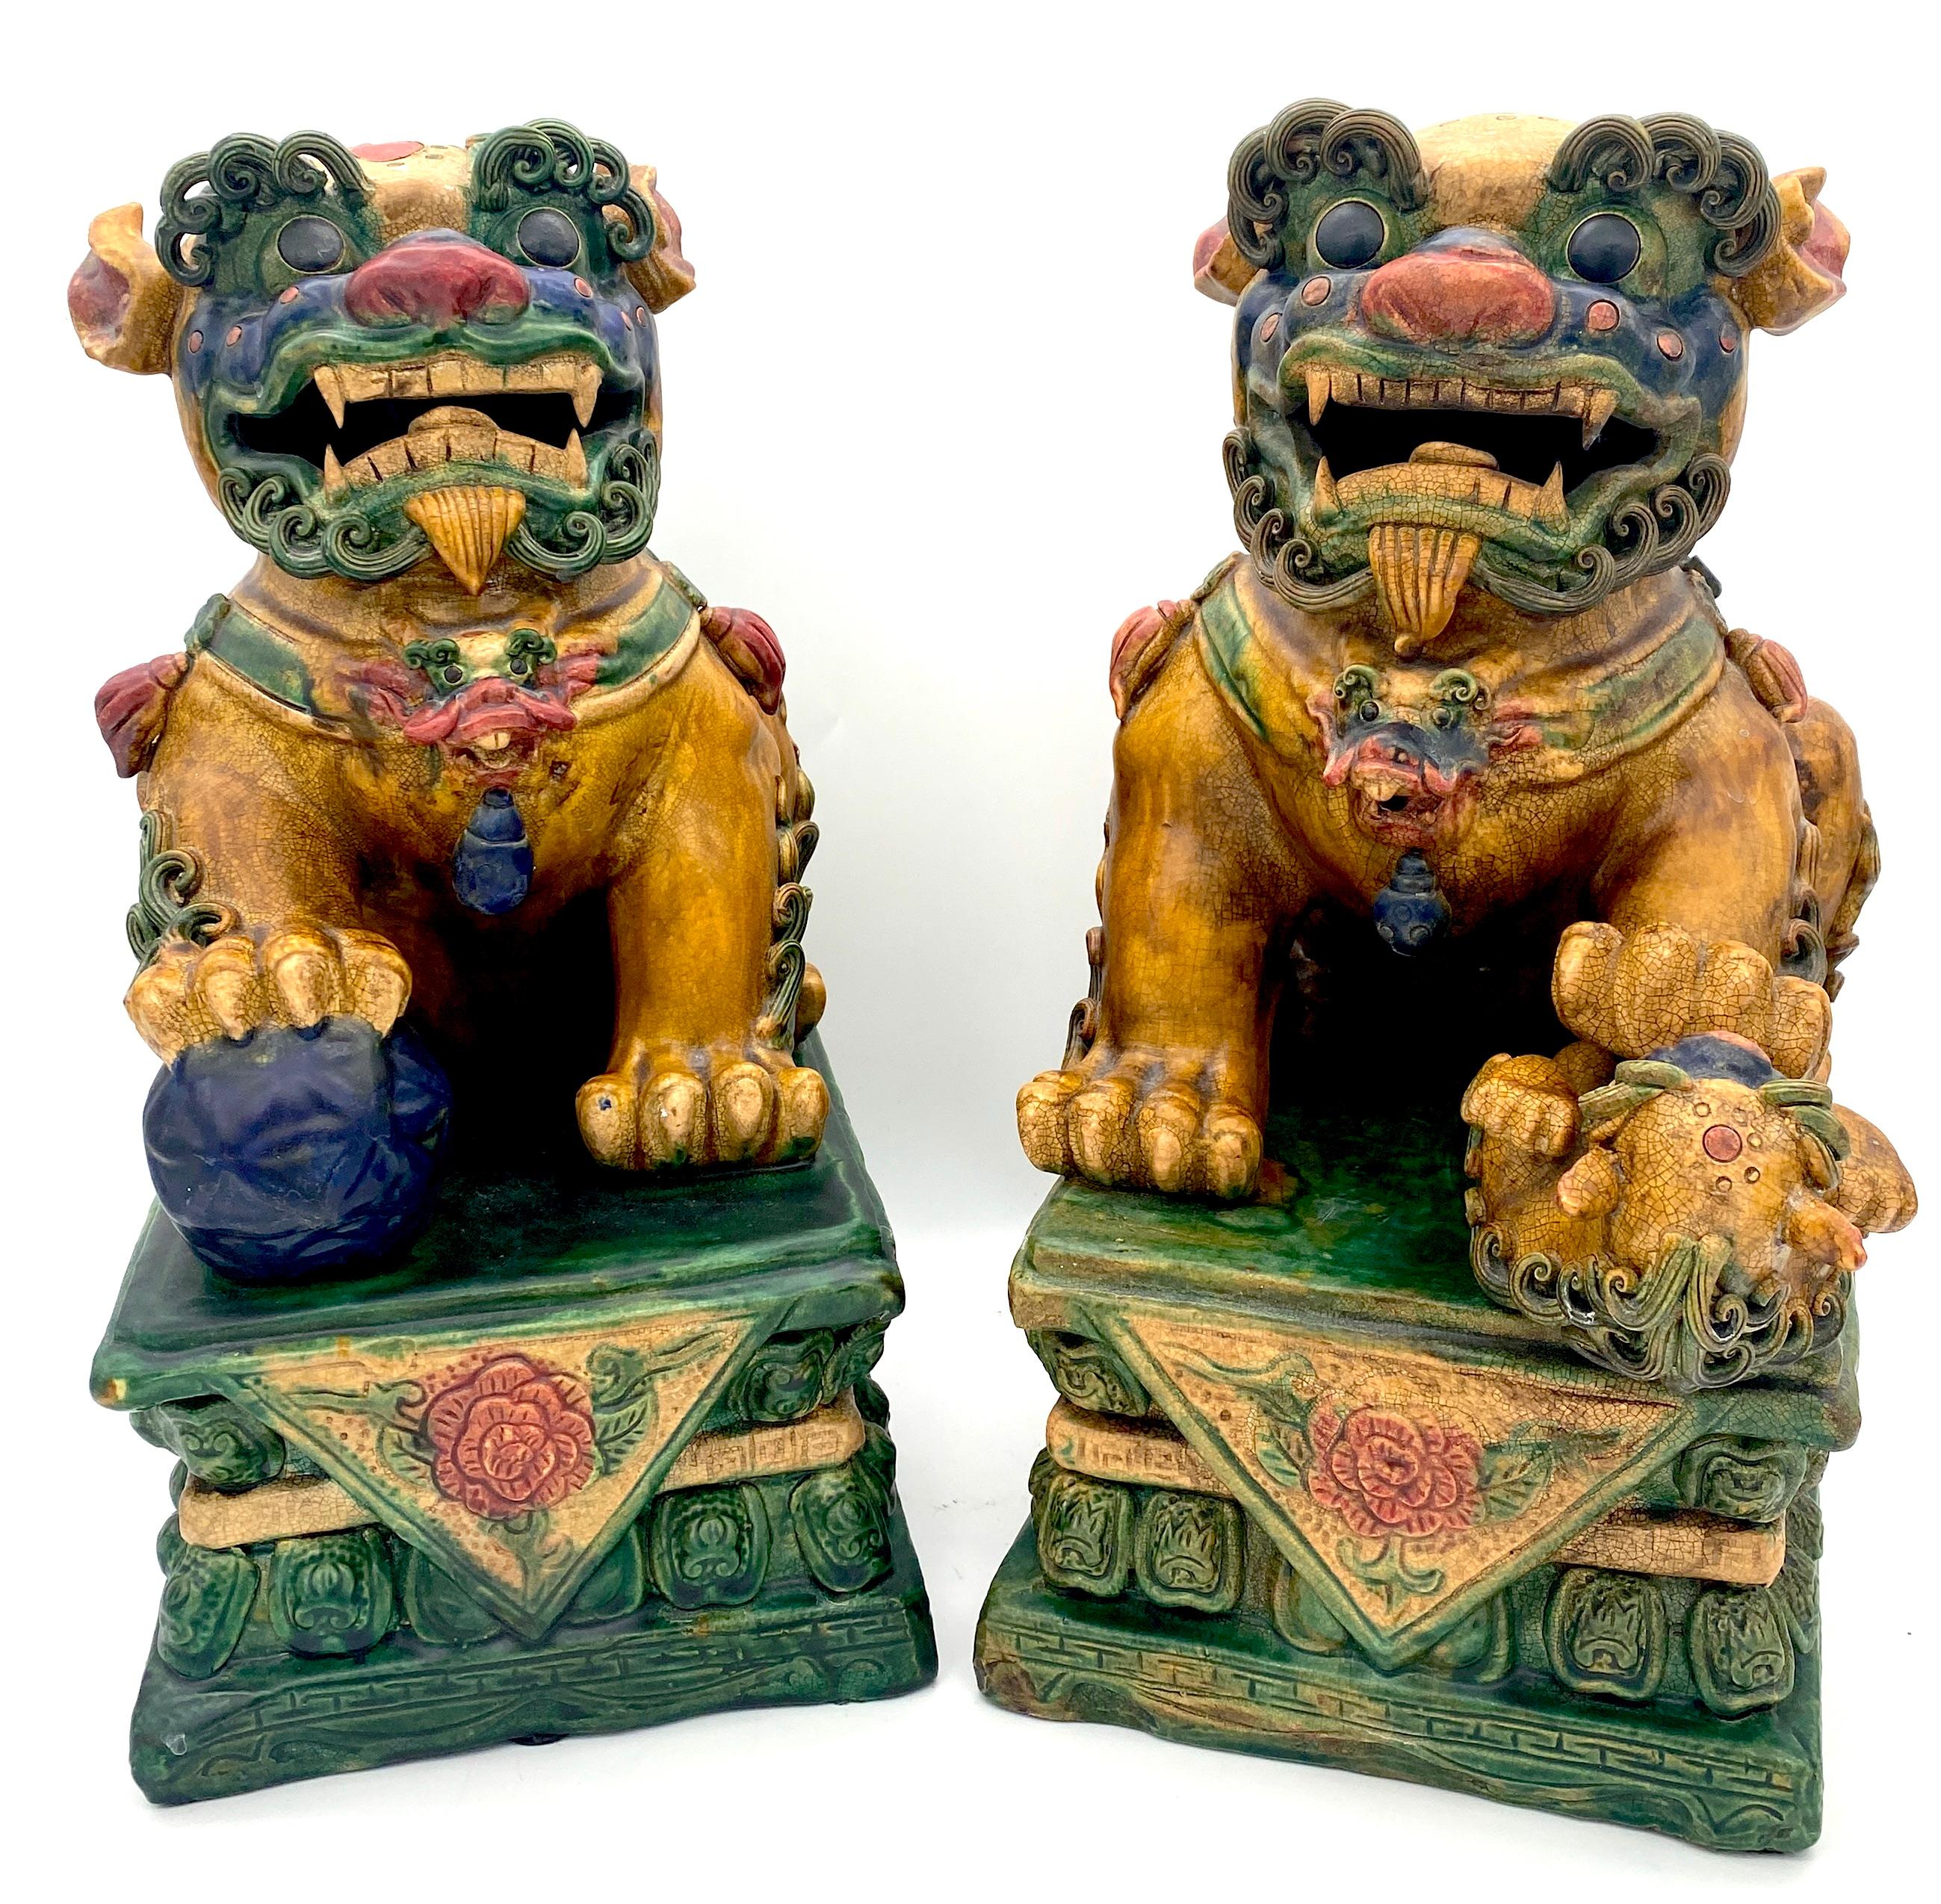 Large Pair of Chinese Export Sancai Glazed Foo Dogs
China, 20th Century 

An exquisite, large-scale Sancai glazed pair of Foo Dogs, featuring elaborately decorated Foo Dogs with remarkable applied elements. The fur detailing, particularly on the